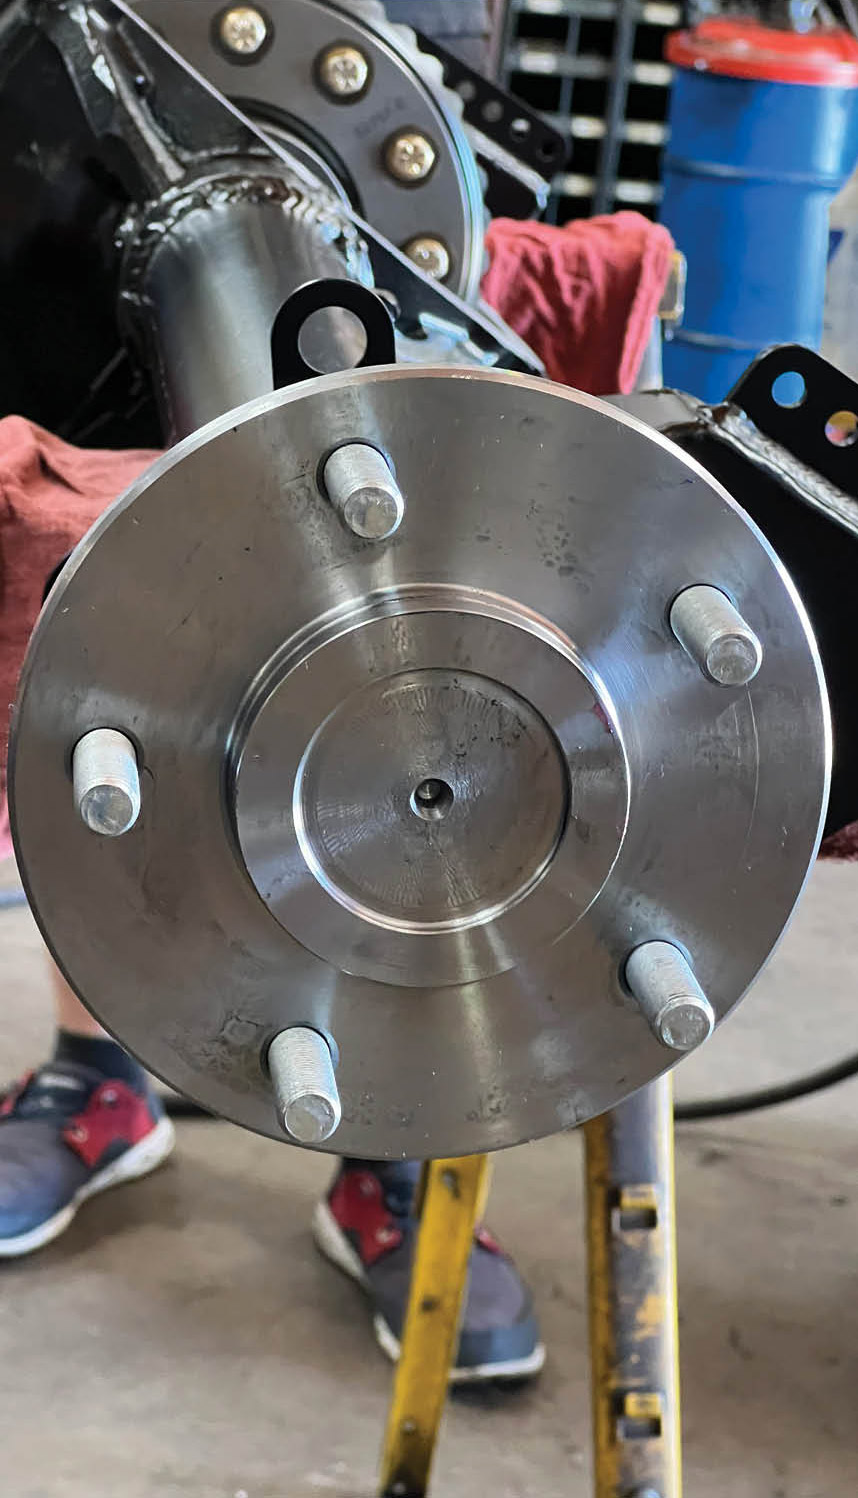 The new CPP 30-spline axles accept ’71-72 five-lug brake drums. This lug bolt pattern offers many more custom wheel alternatives than the earlier sixbolt axles.